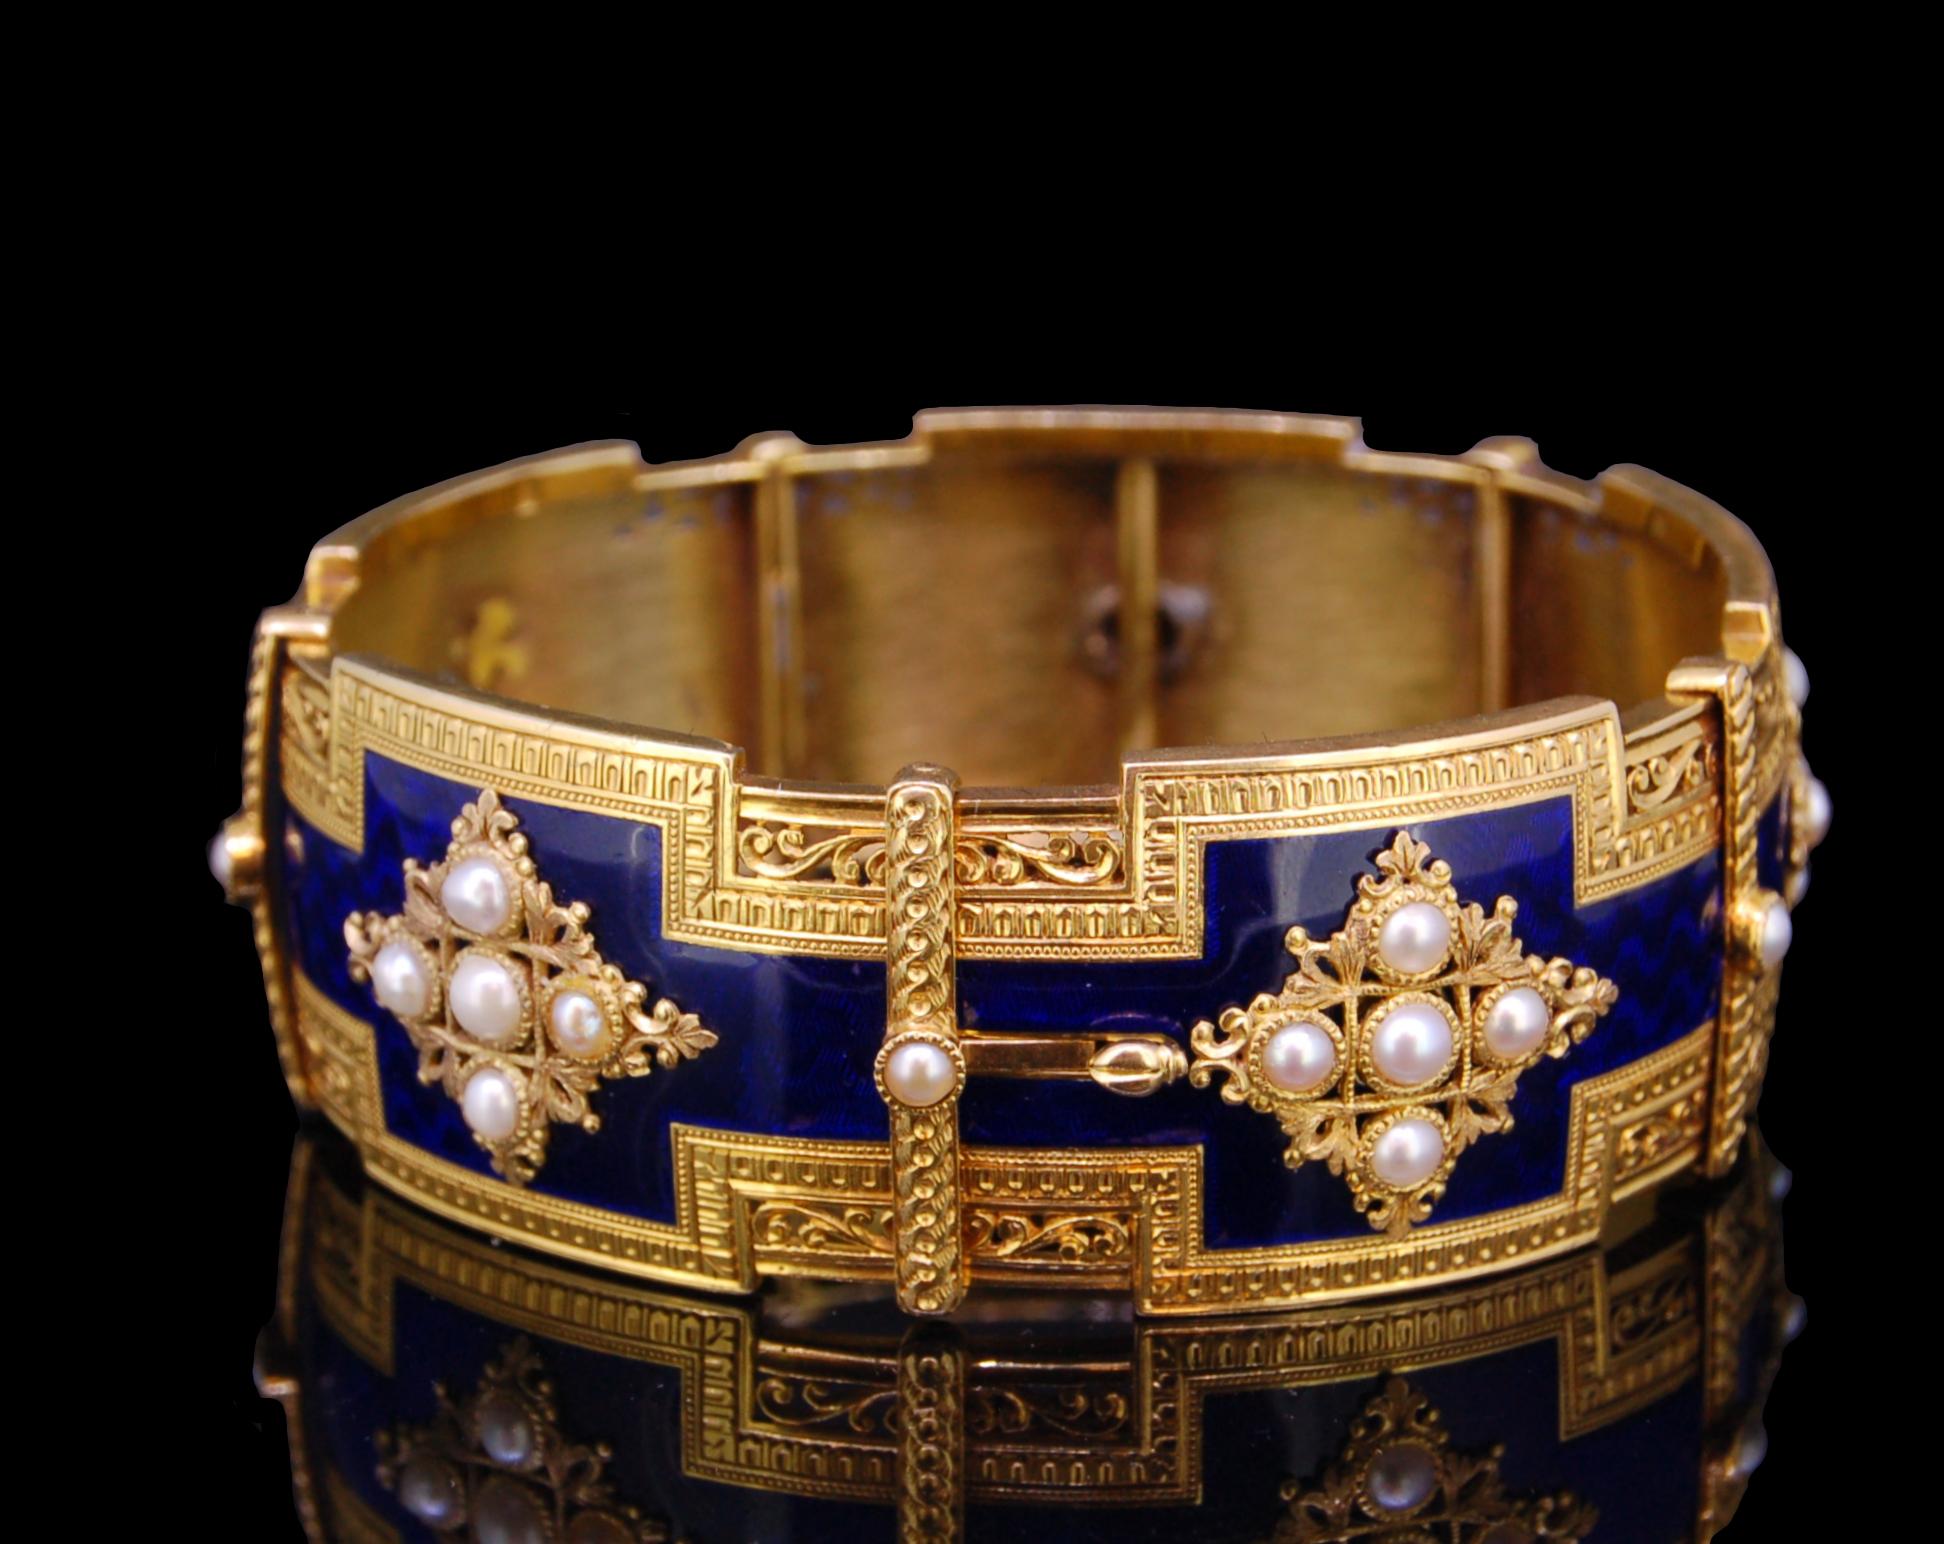 ANTIQUE 18ct GOLD, ENAMEL AND PEARL BANGLE BRACELET, the mid section decorated with blue enamel, set with star shaped openwork appliques set with pearls, the appliques alternated with vertical bands set with a pearl. The sides of the bracelet with